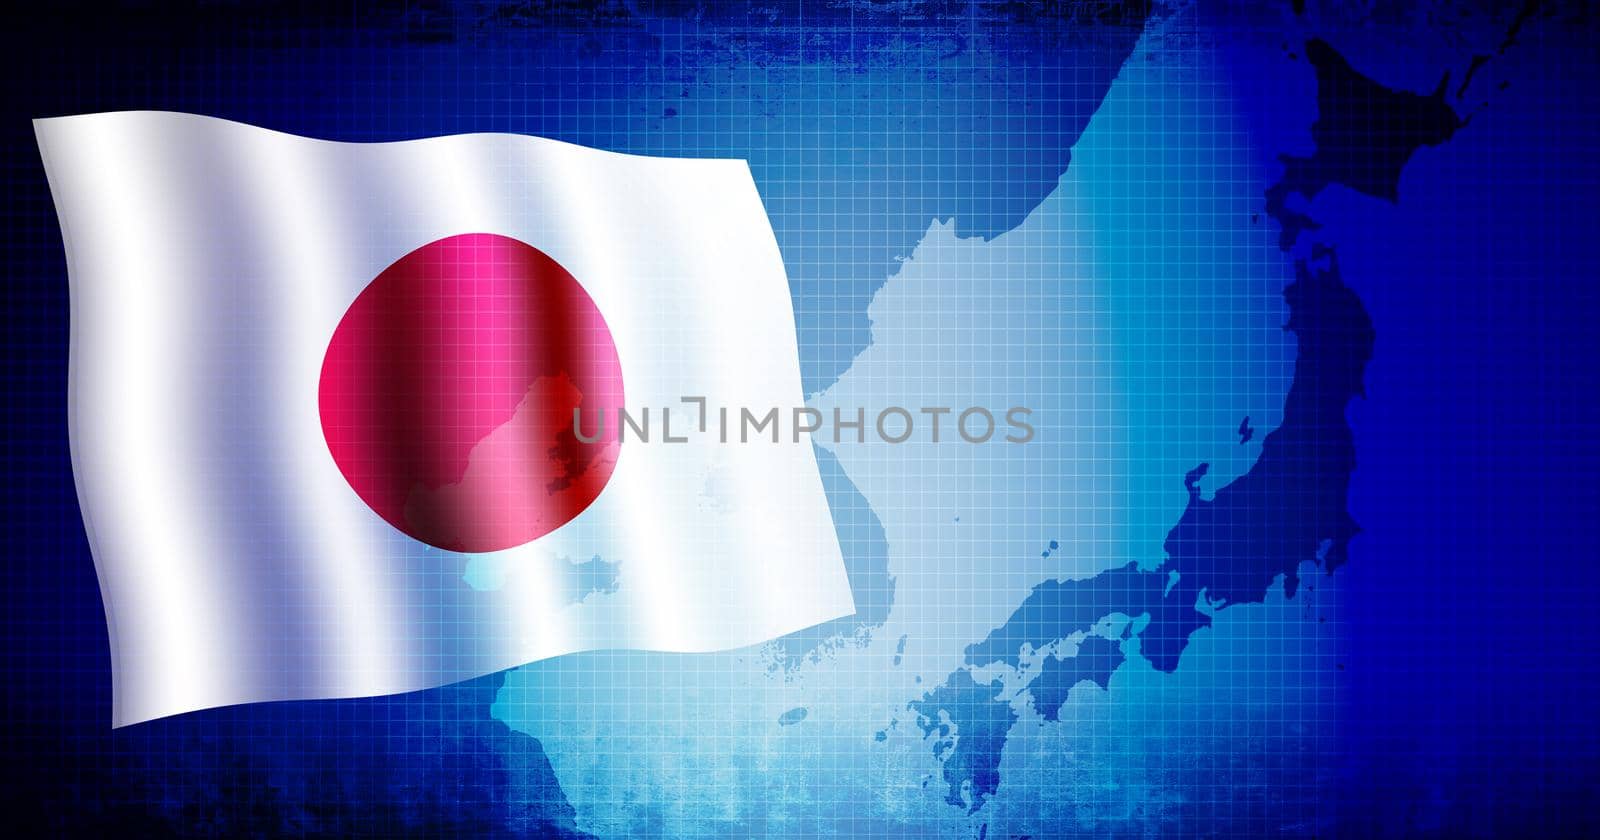 Japanese national flag and east asia map / web banner background (text space)